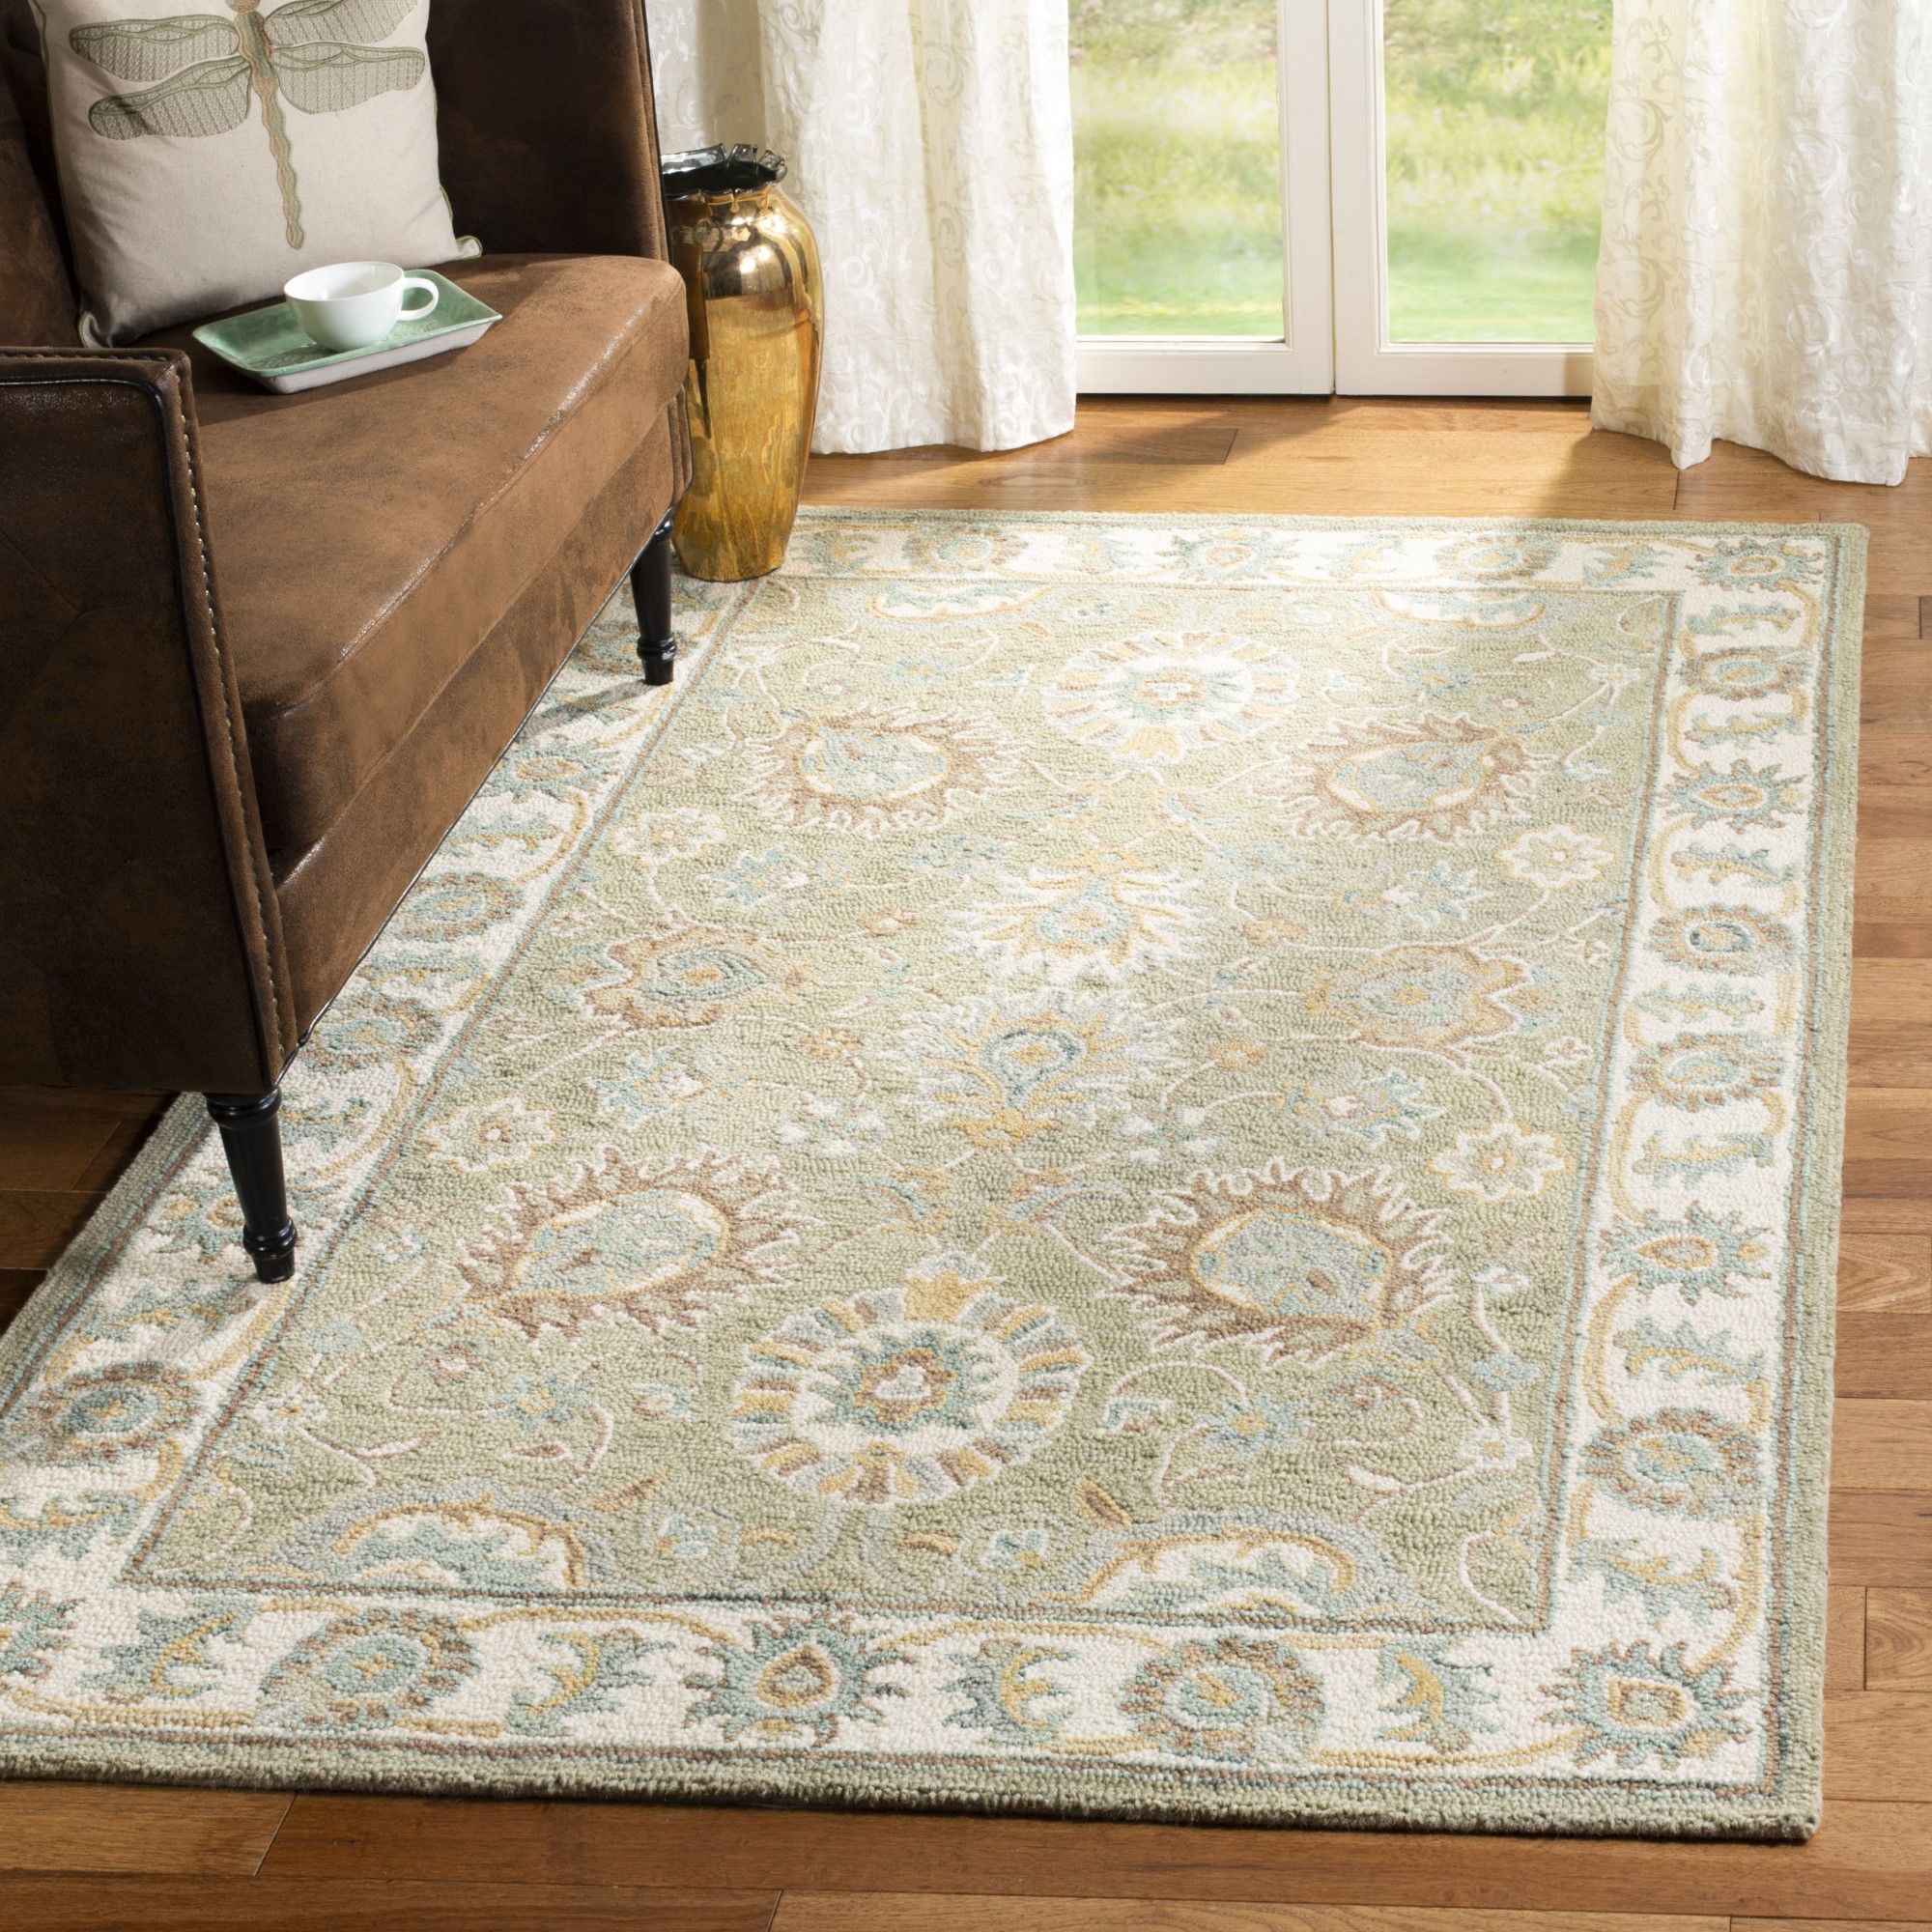 Safavieh Blossom Blm 702 Rugs | Rugs Direct Within Ivory Blossom Oval Rugs (View 7 of 15)